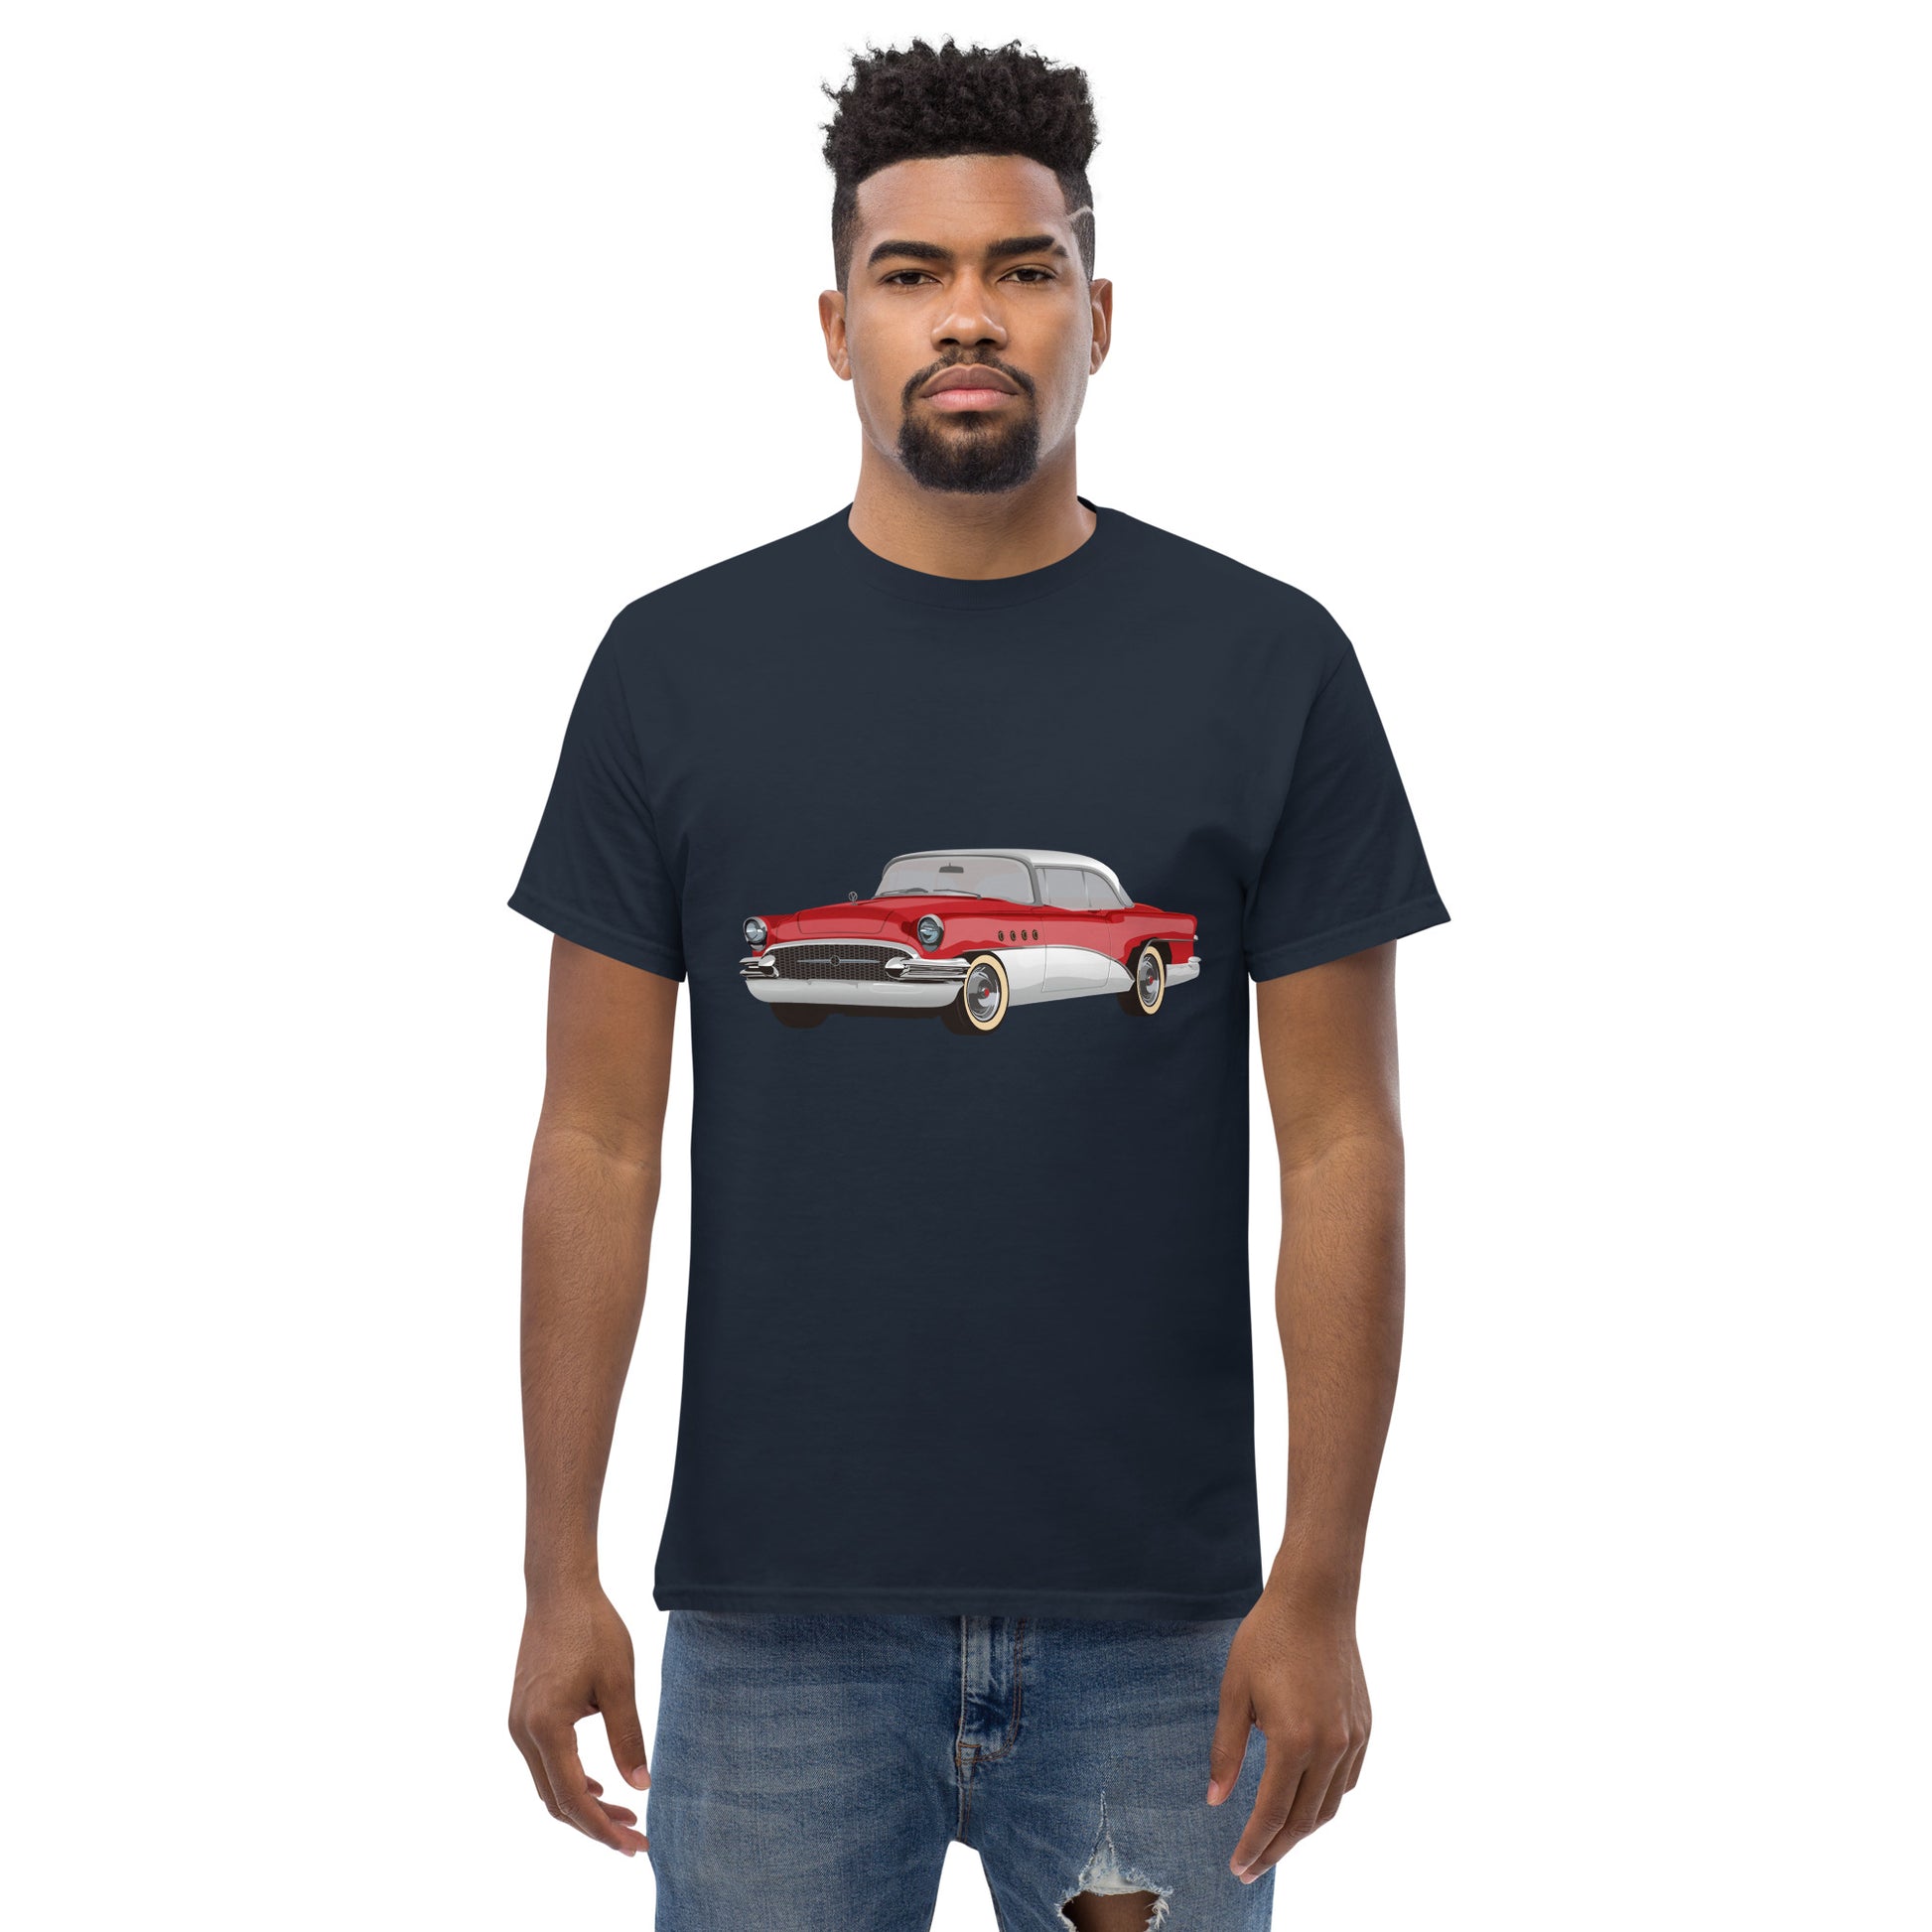 Men with navy blue t-shirt with red Chevrolet 